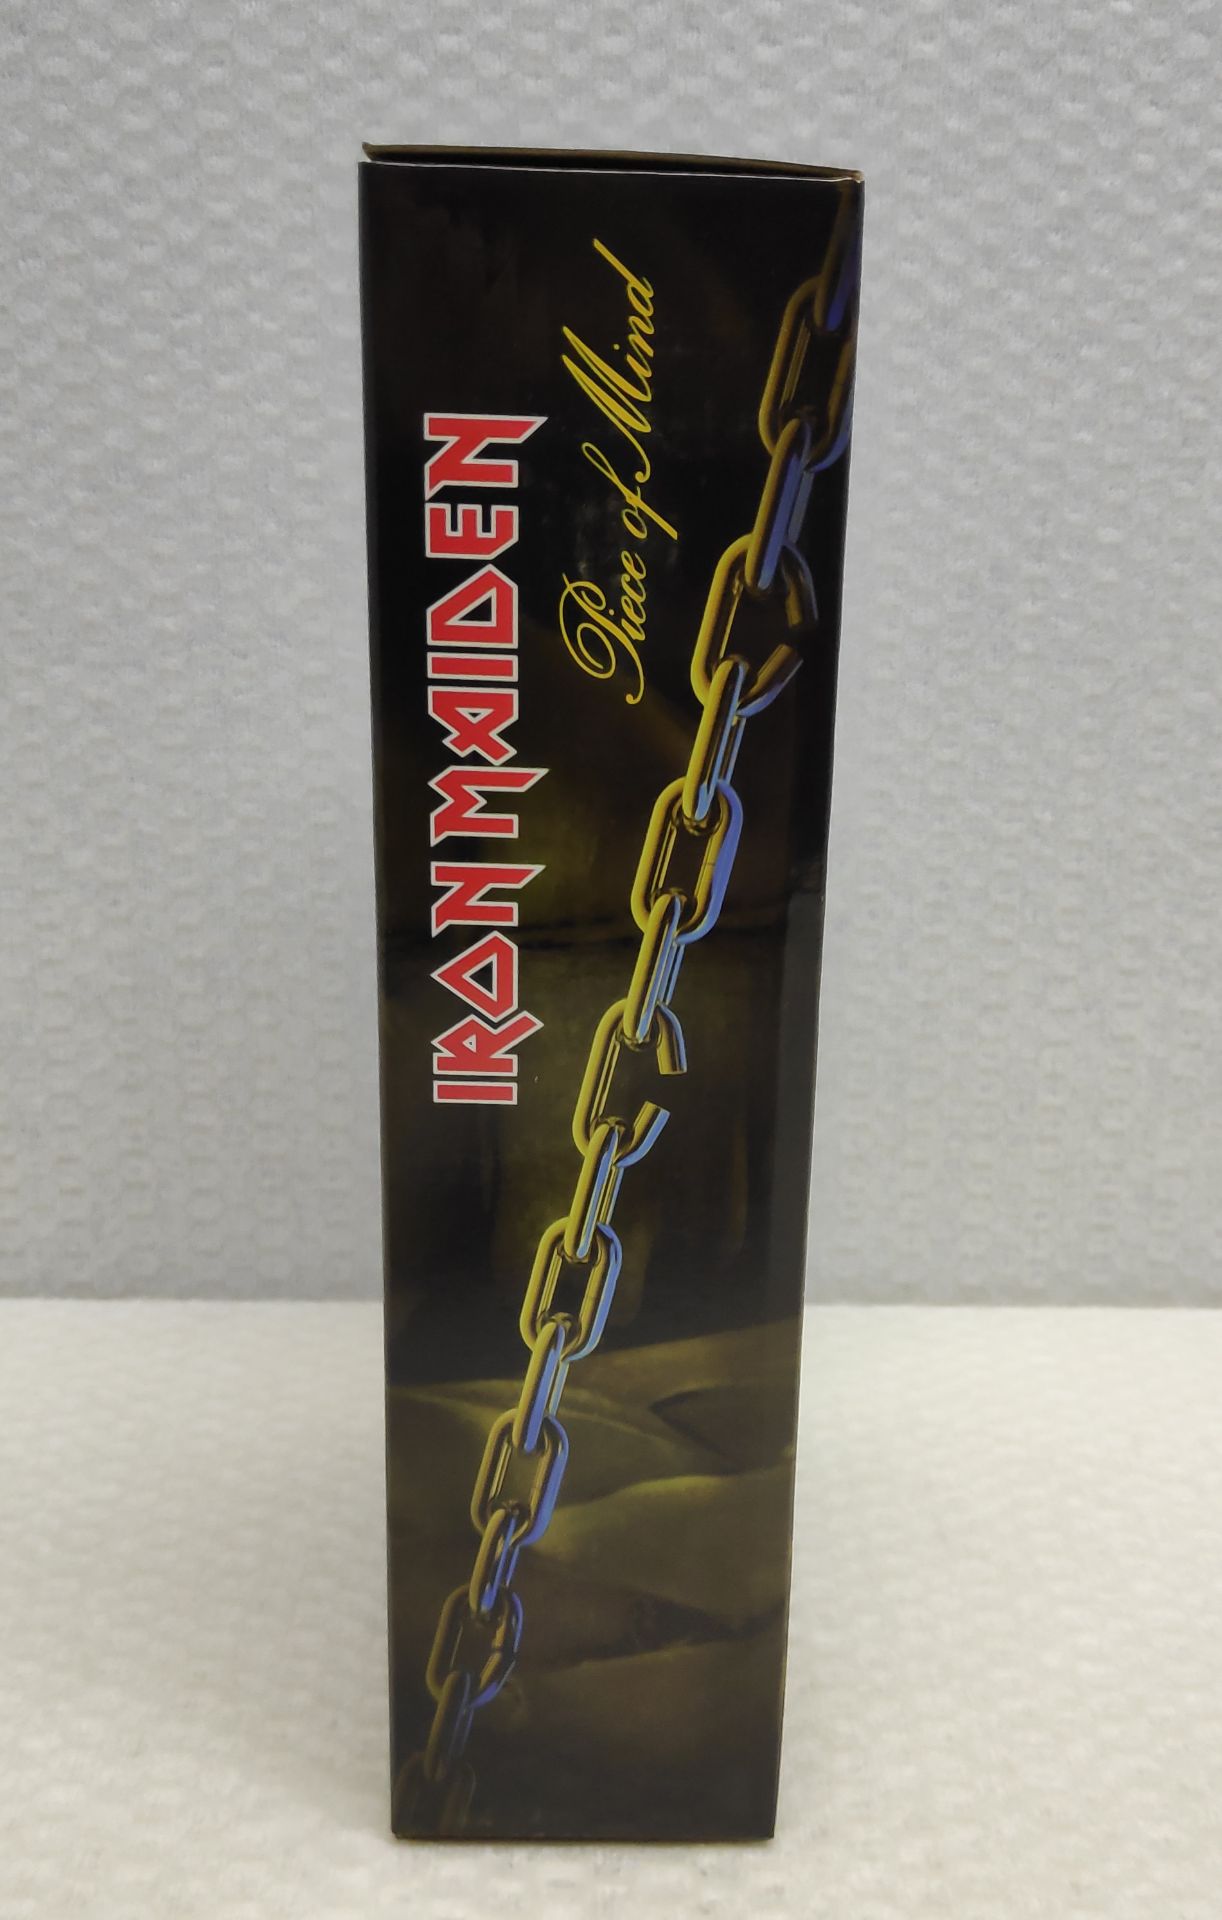 1 x Iron Maiden Eddie Piece of Mind NECA Action Figure - New/Boxed - HTYS166 - CL720 - Location: Alt - Image 3 of 11